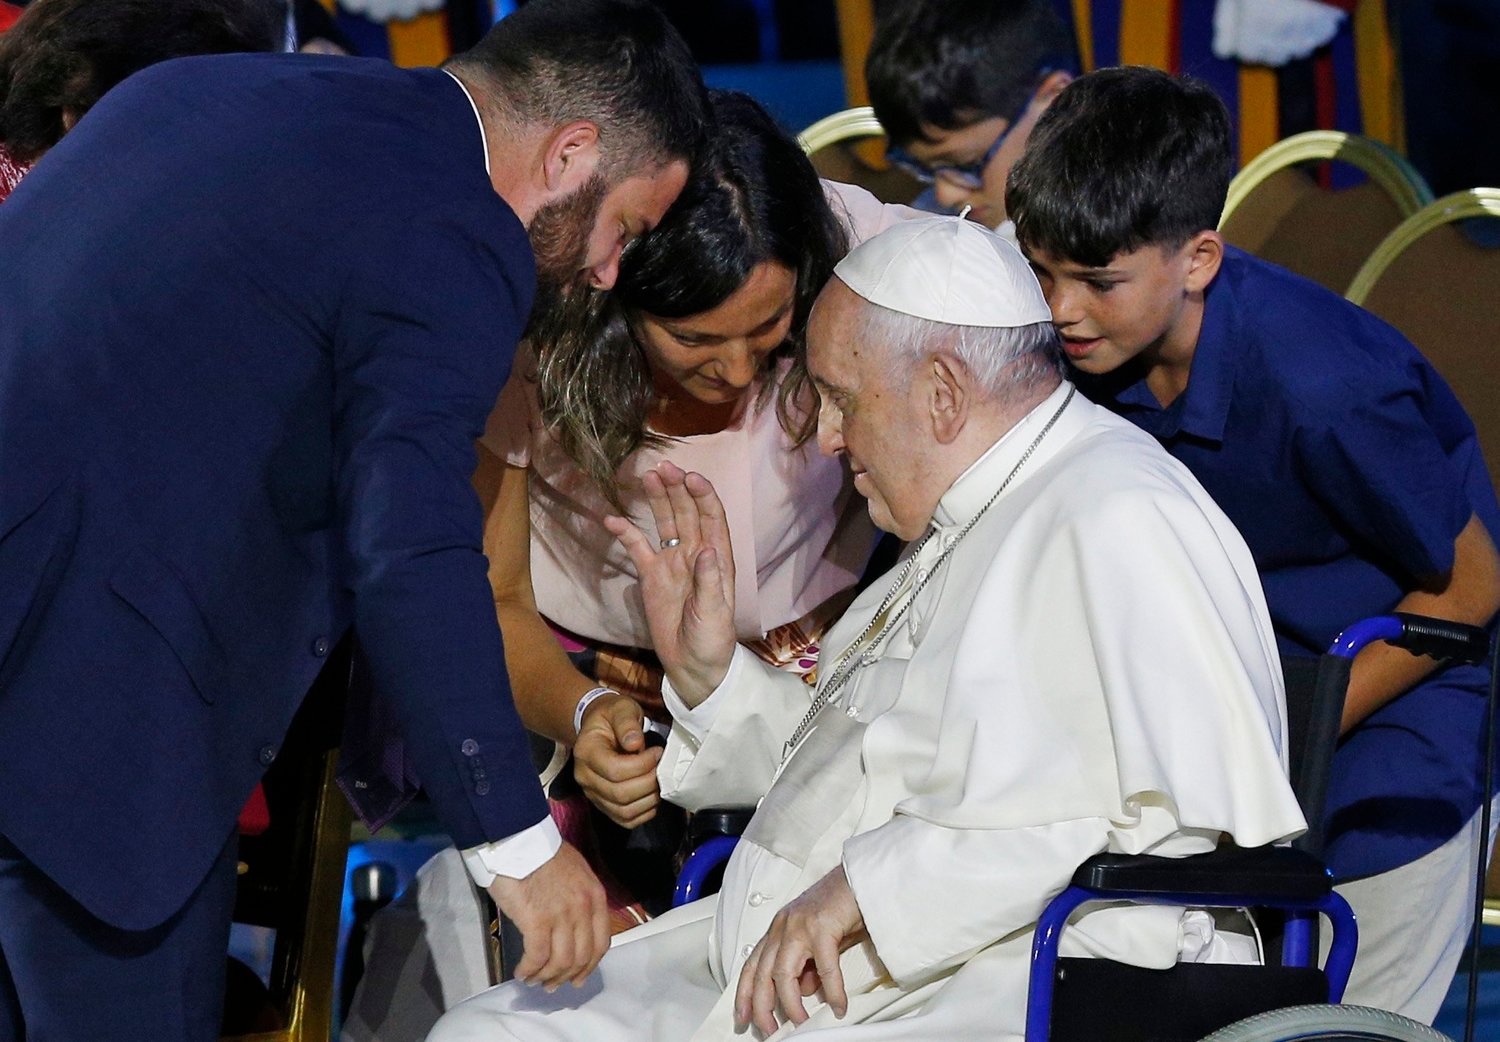 Pope Francis blesses Pietro and Erika Chiriaco, who are hosting a Ukrainian family in Italy, as he opens the World Meeting of Families in the Paul VI hall at the Vatican June 22.